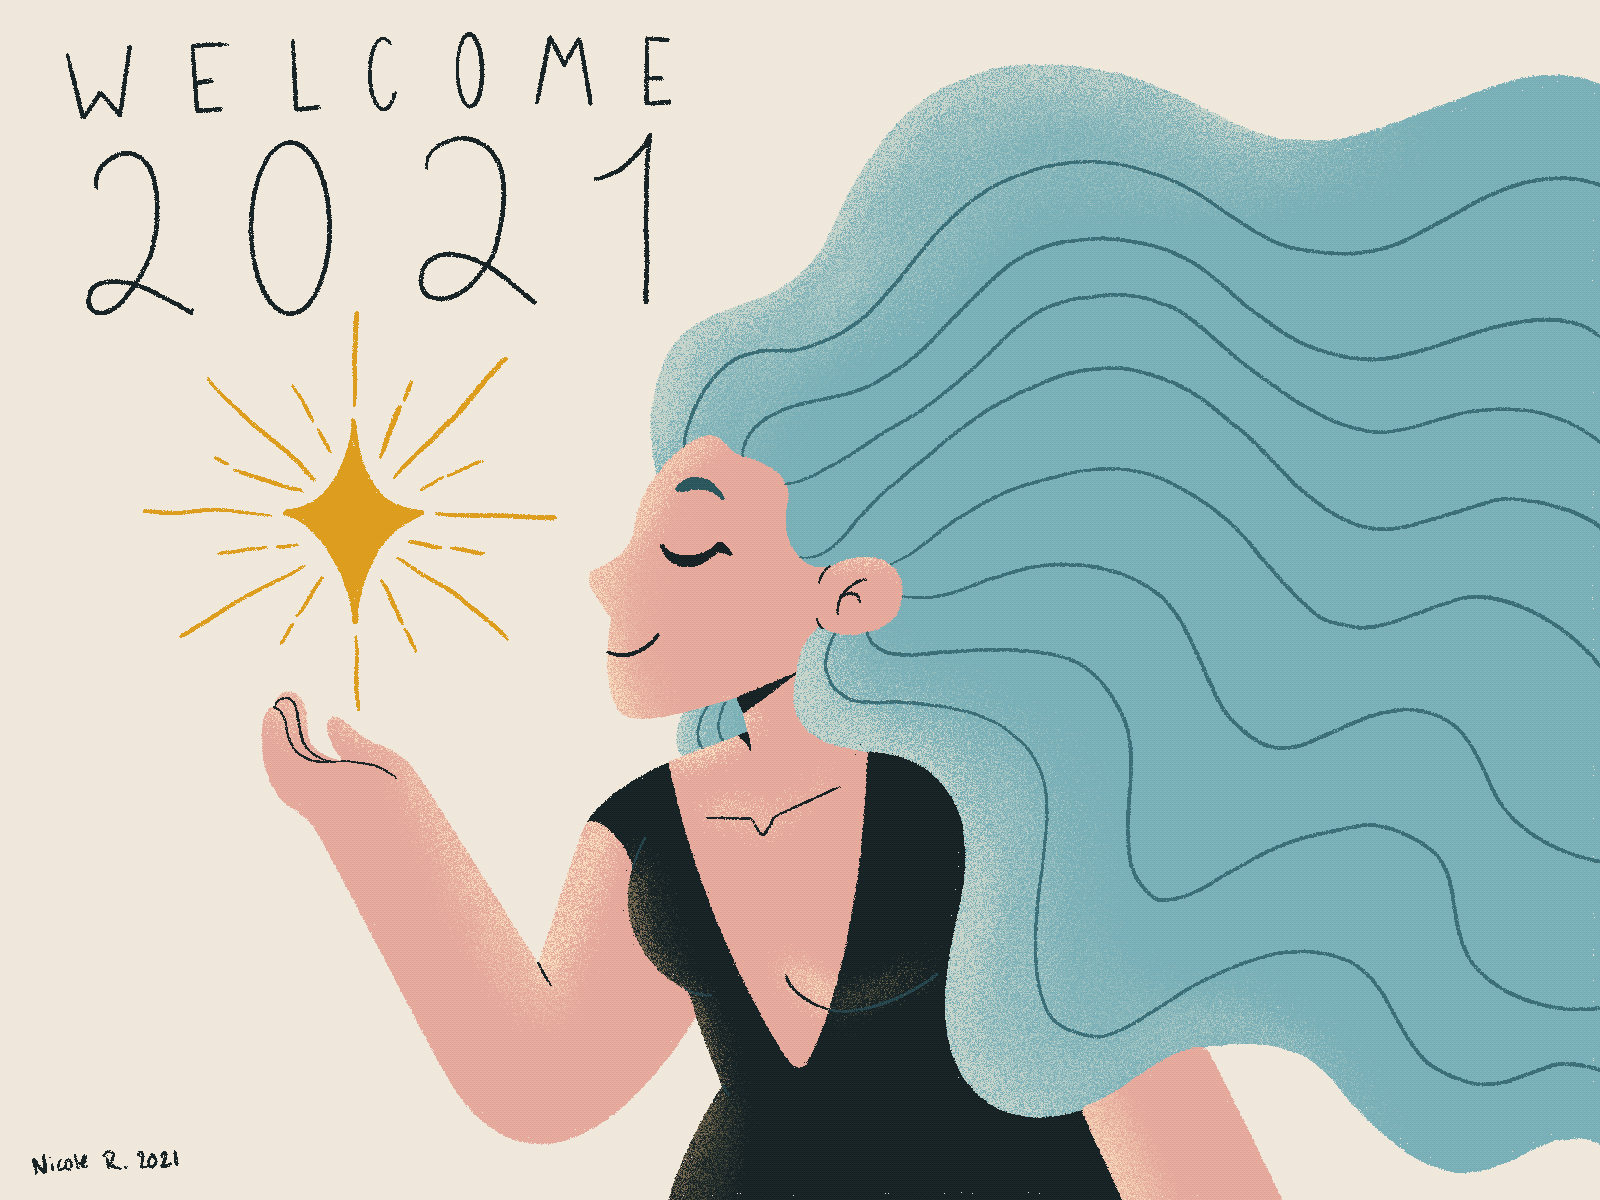 Welcome 2021 2021 2d animation animation celebrate frame by frame hand lettered handlettering happy happy new year happy new year 2021 illustration illustrative lettering lettering motion design motion graphics peace peaceful sparkle star typography